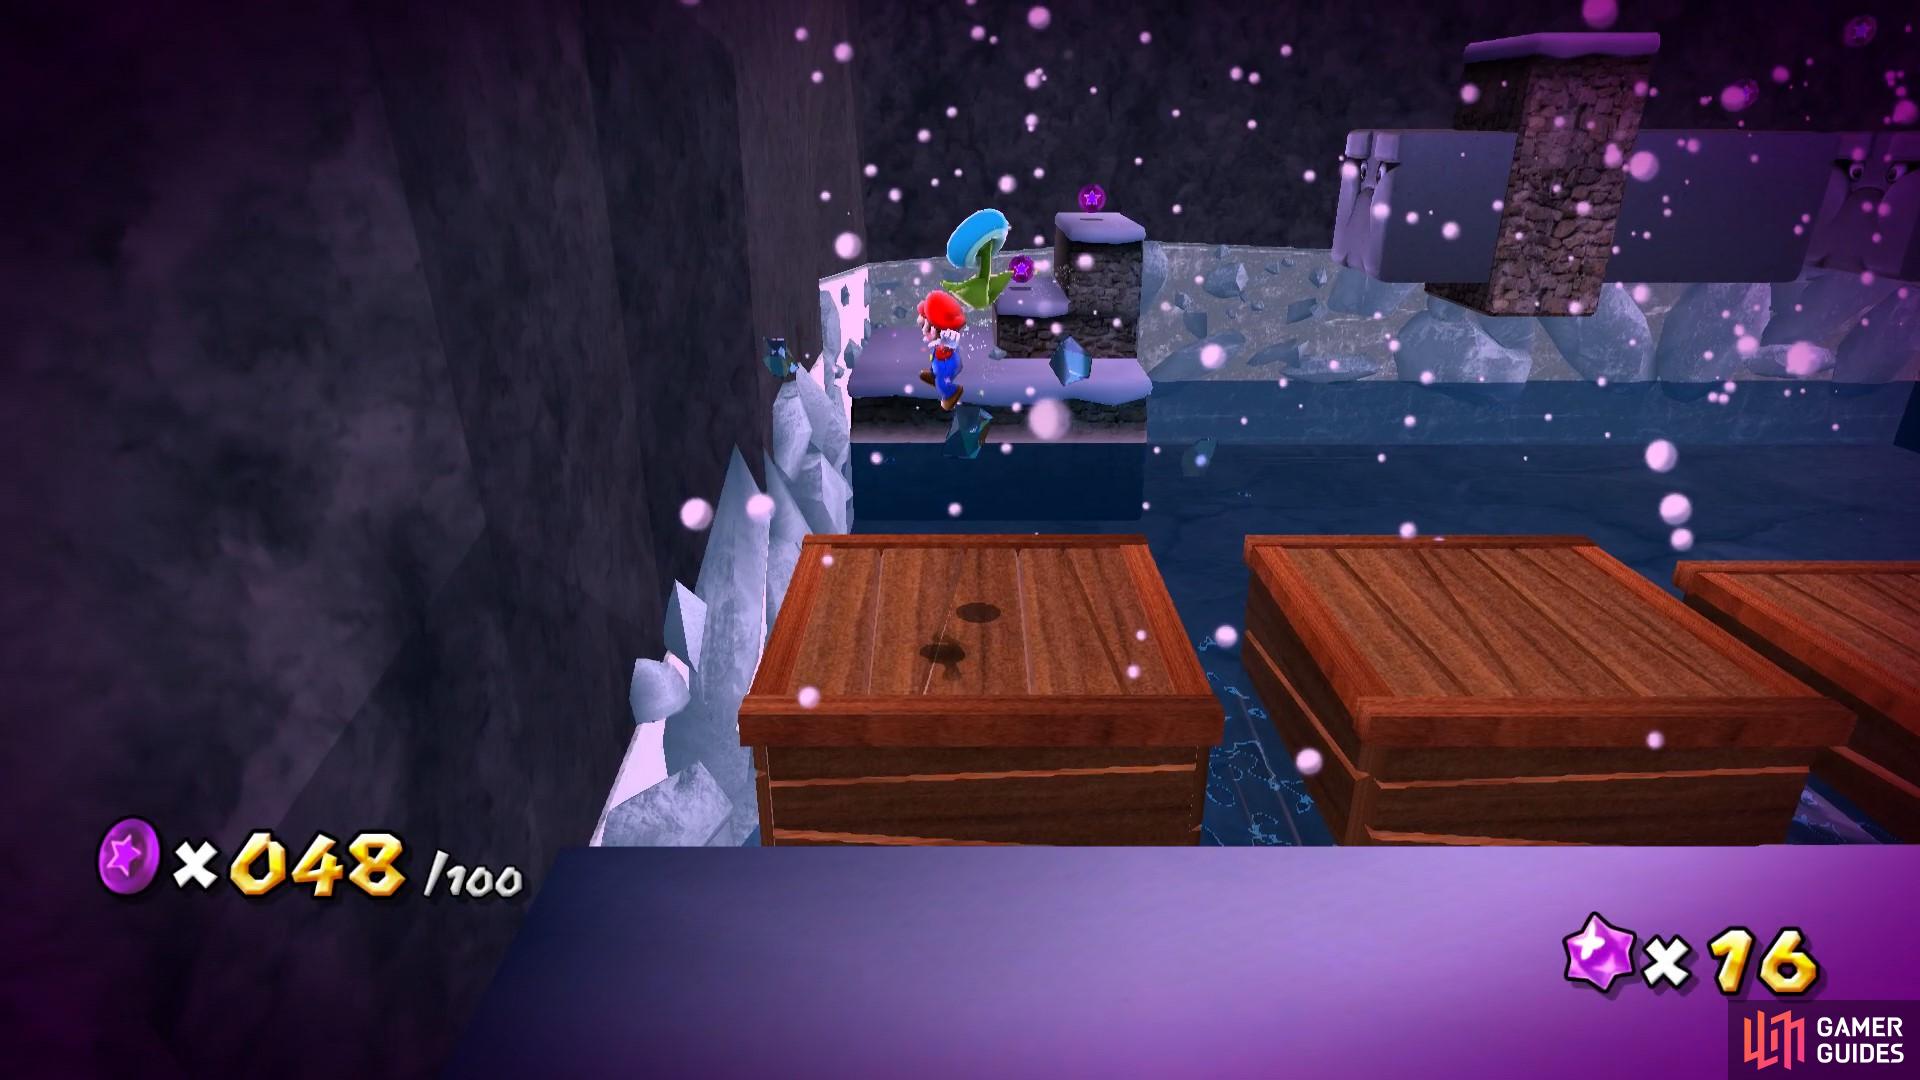 Head across the wooden crate platforms to grab another Ice Flower.